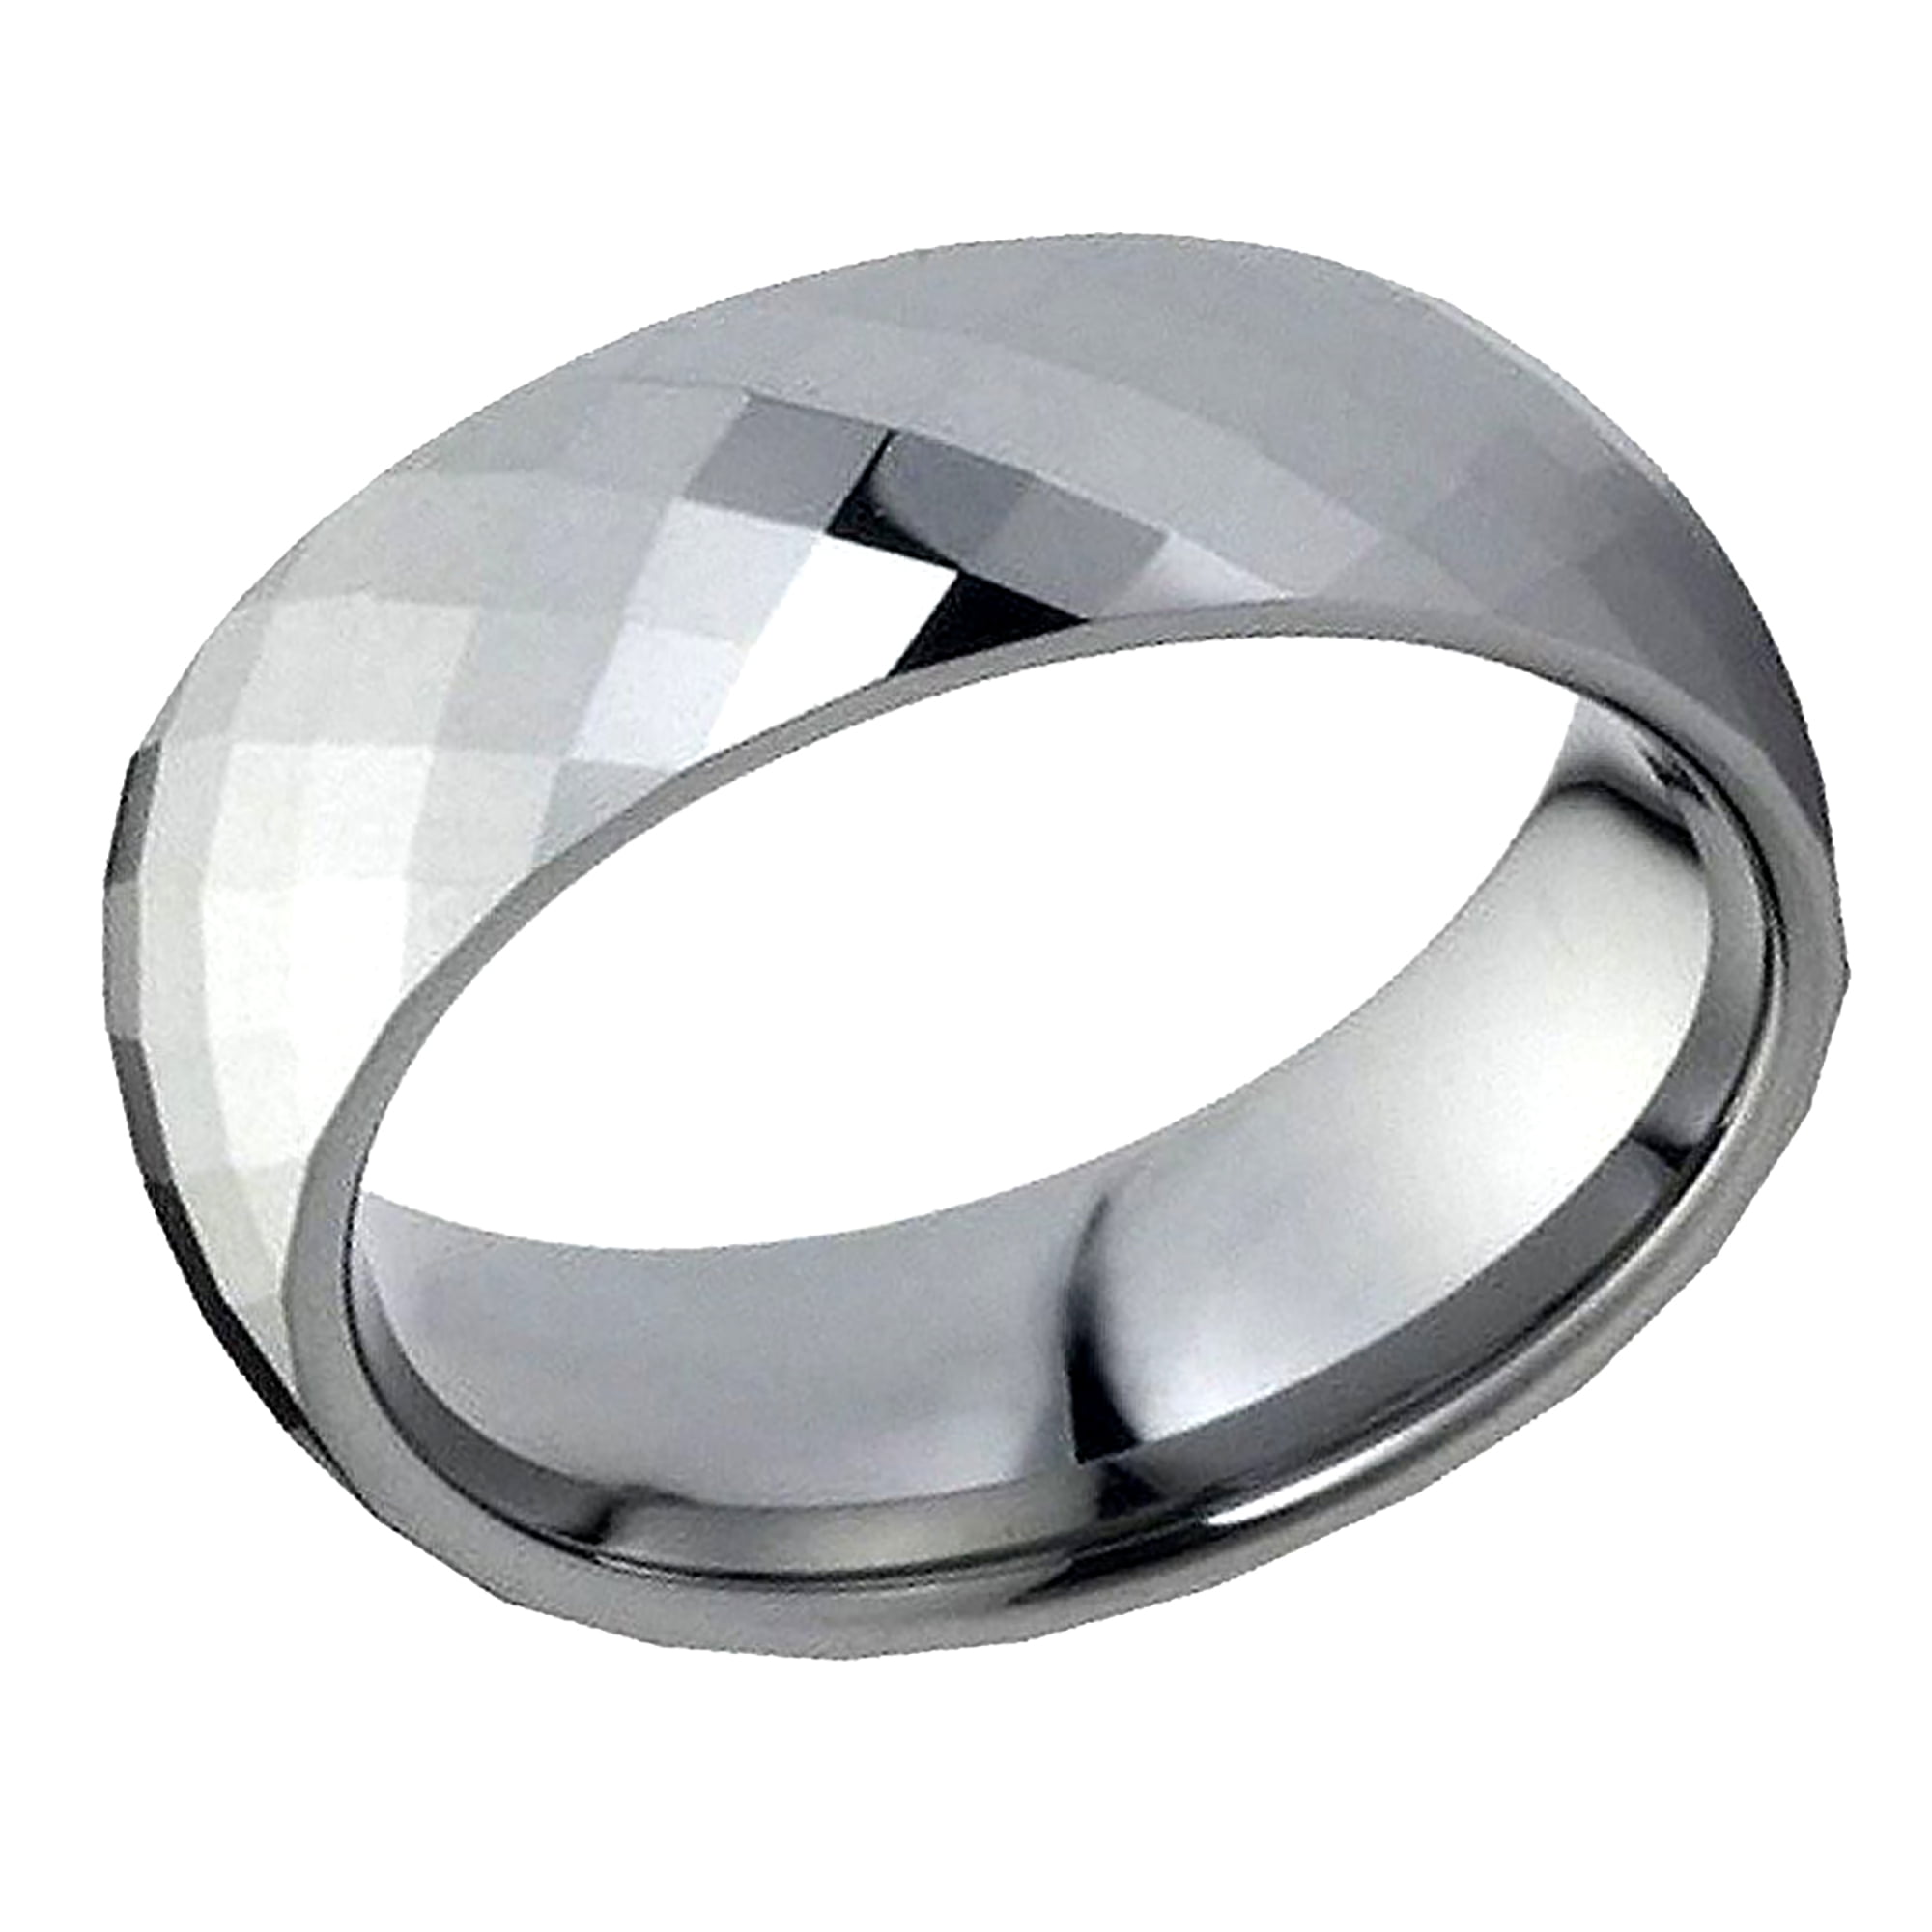 Tungsten Carbide Ring Men Women Wedding Band Domed Faceted Design Comfort Fit 